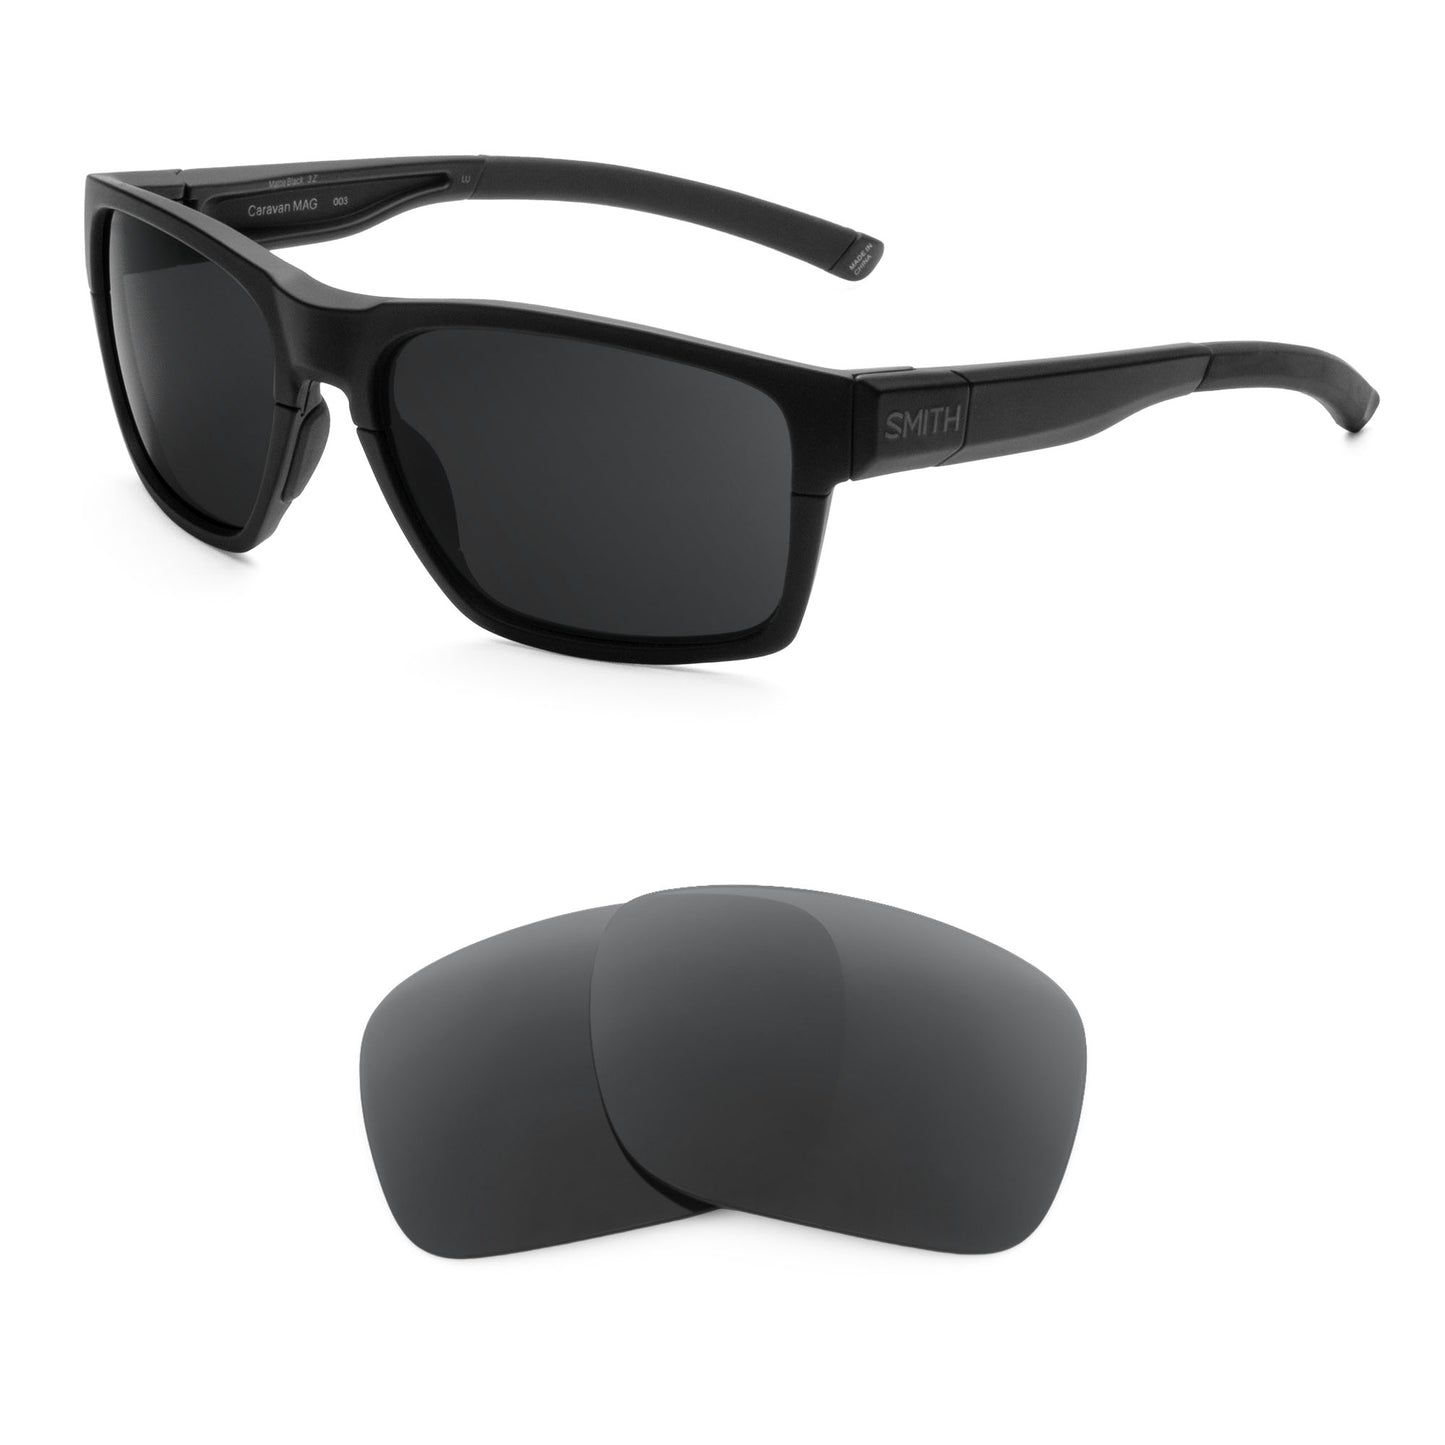 Smith Caravan MAG sunglasses with replacement lenses